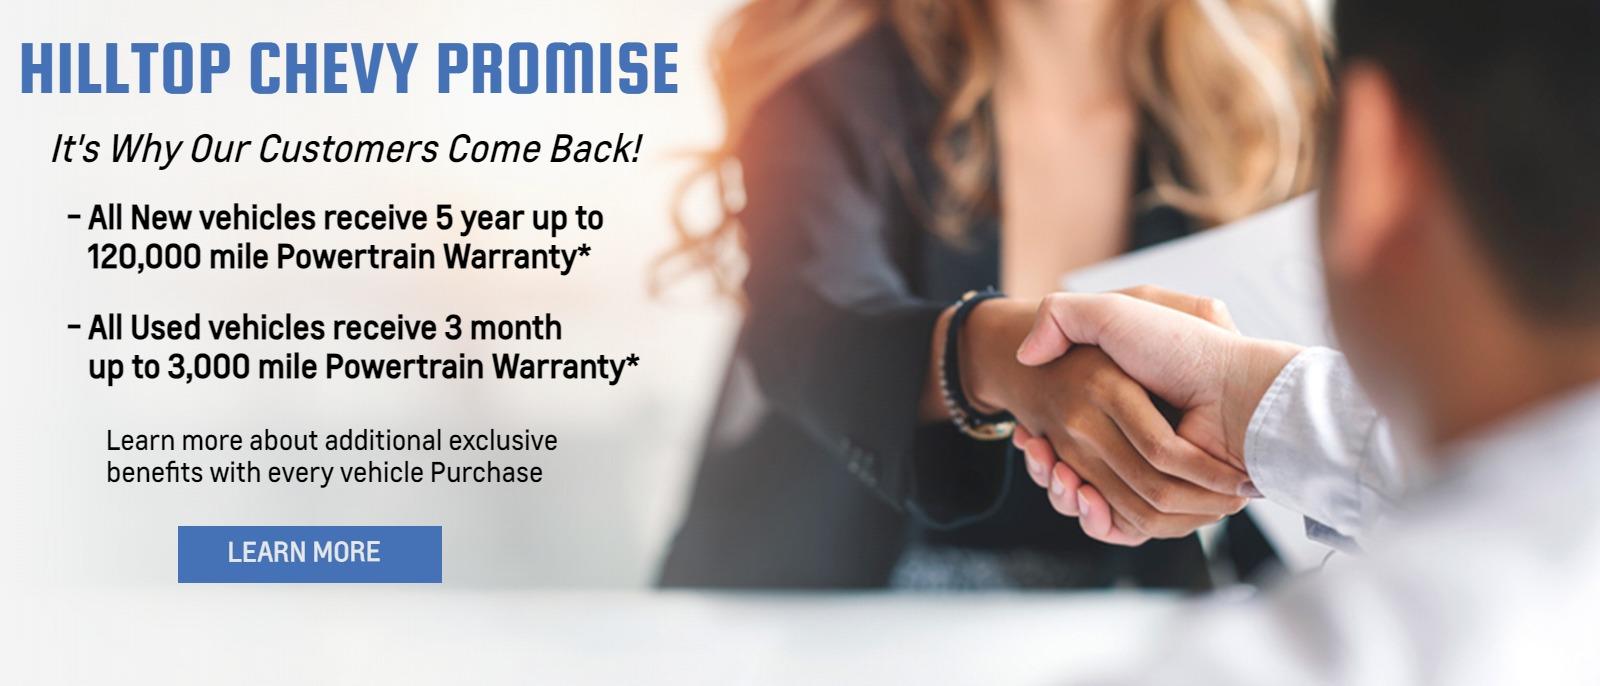 Hilltop Chevy Promise

It's Why Our Customers Come Back!

-All New vehicles receive 5 year up to 120,000 mile Powertrain Warranty*

-All Used vehicles receive 3 month up to 3,000 mile Powertrain Warranty*

Learn more about additional exclusive benefits with every vehicle Purchase